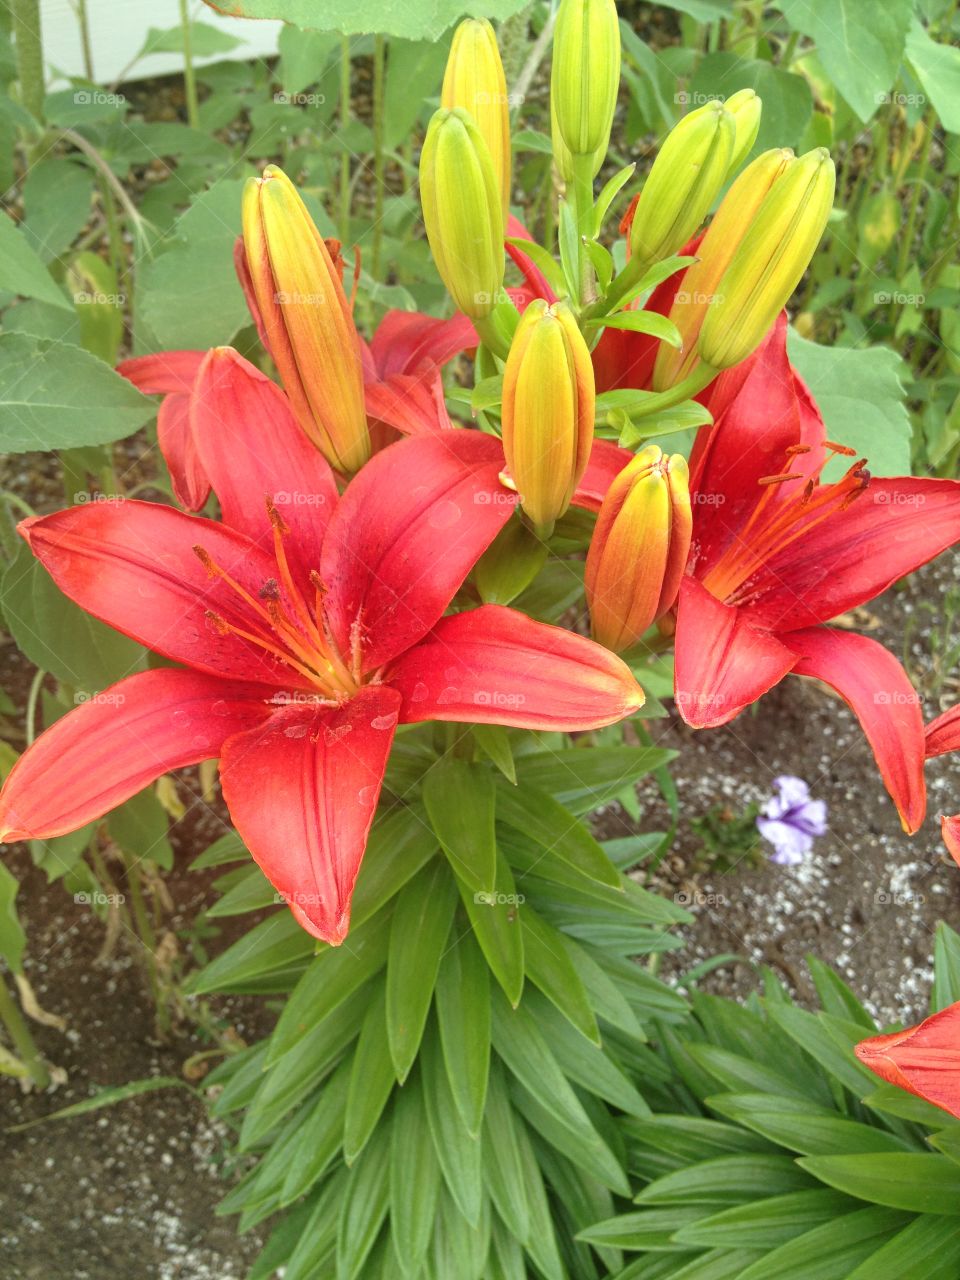 Red lily in bloom